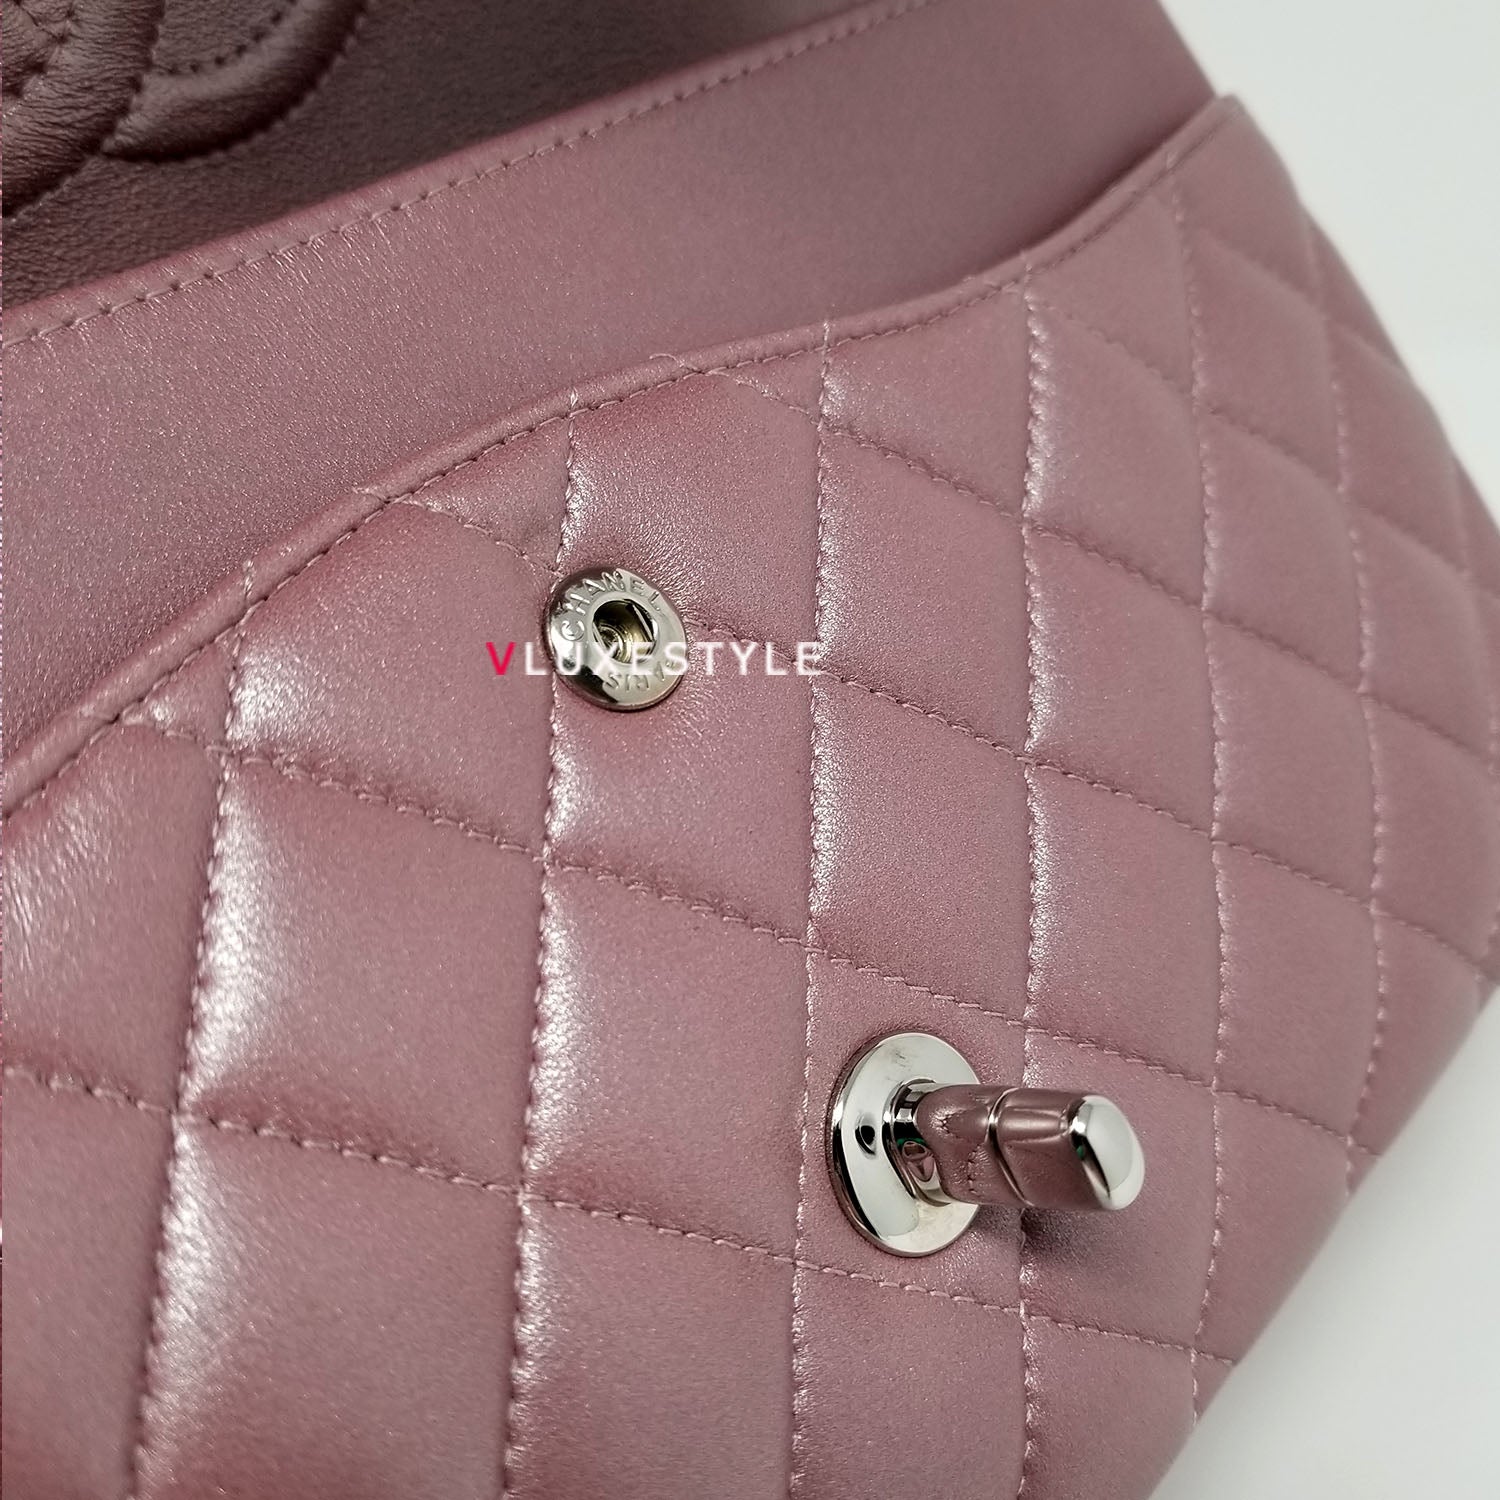 Chanel Classic Medium Double Flap Iridescent Mauve Lambskin with silver  hardware